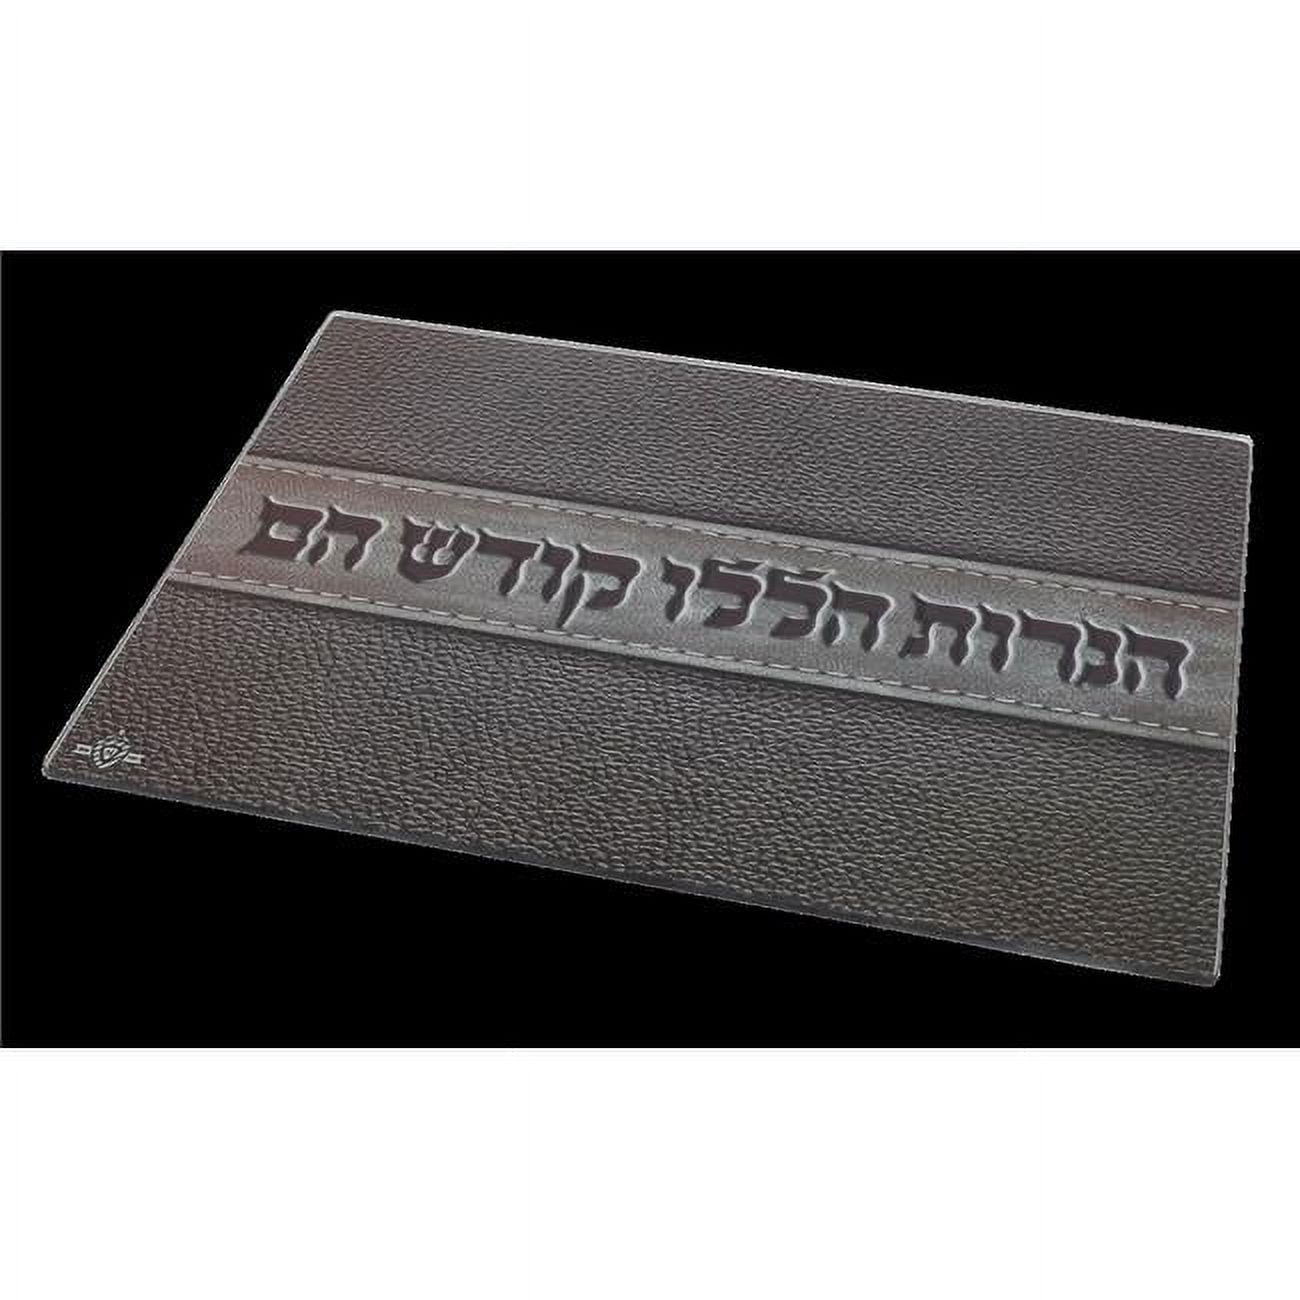 Picture of Nua 57041 13.5 x 9.5 in. Tempered Glass Leather Look Haneiros Hallalu Chanukah Menorah Tray